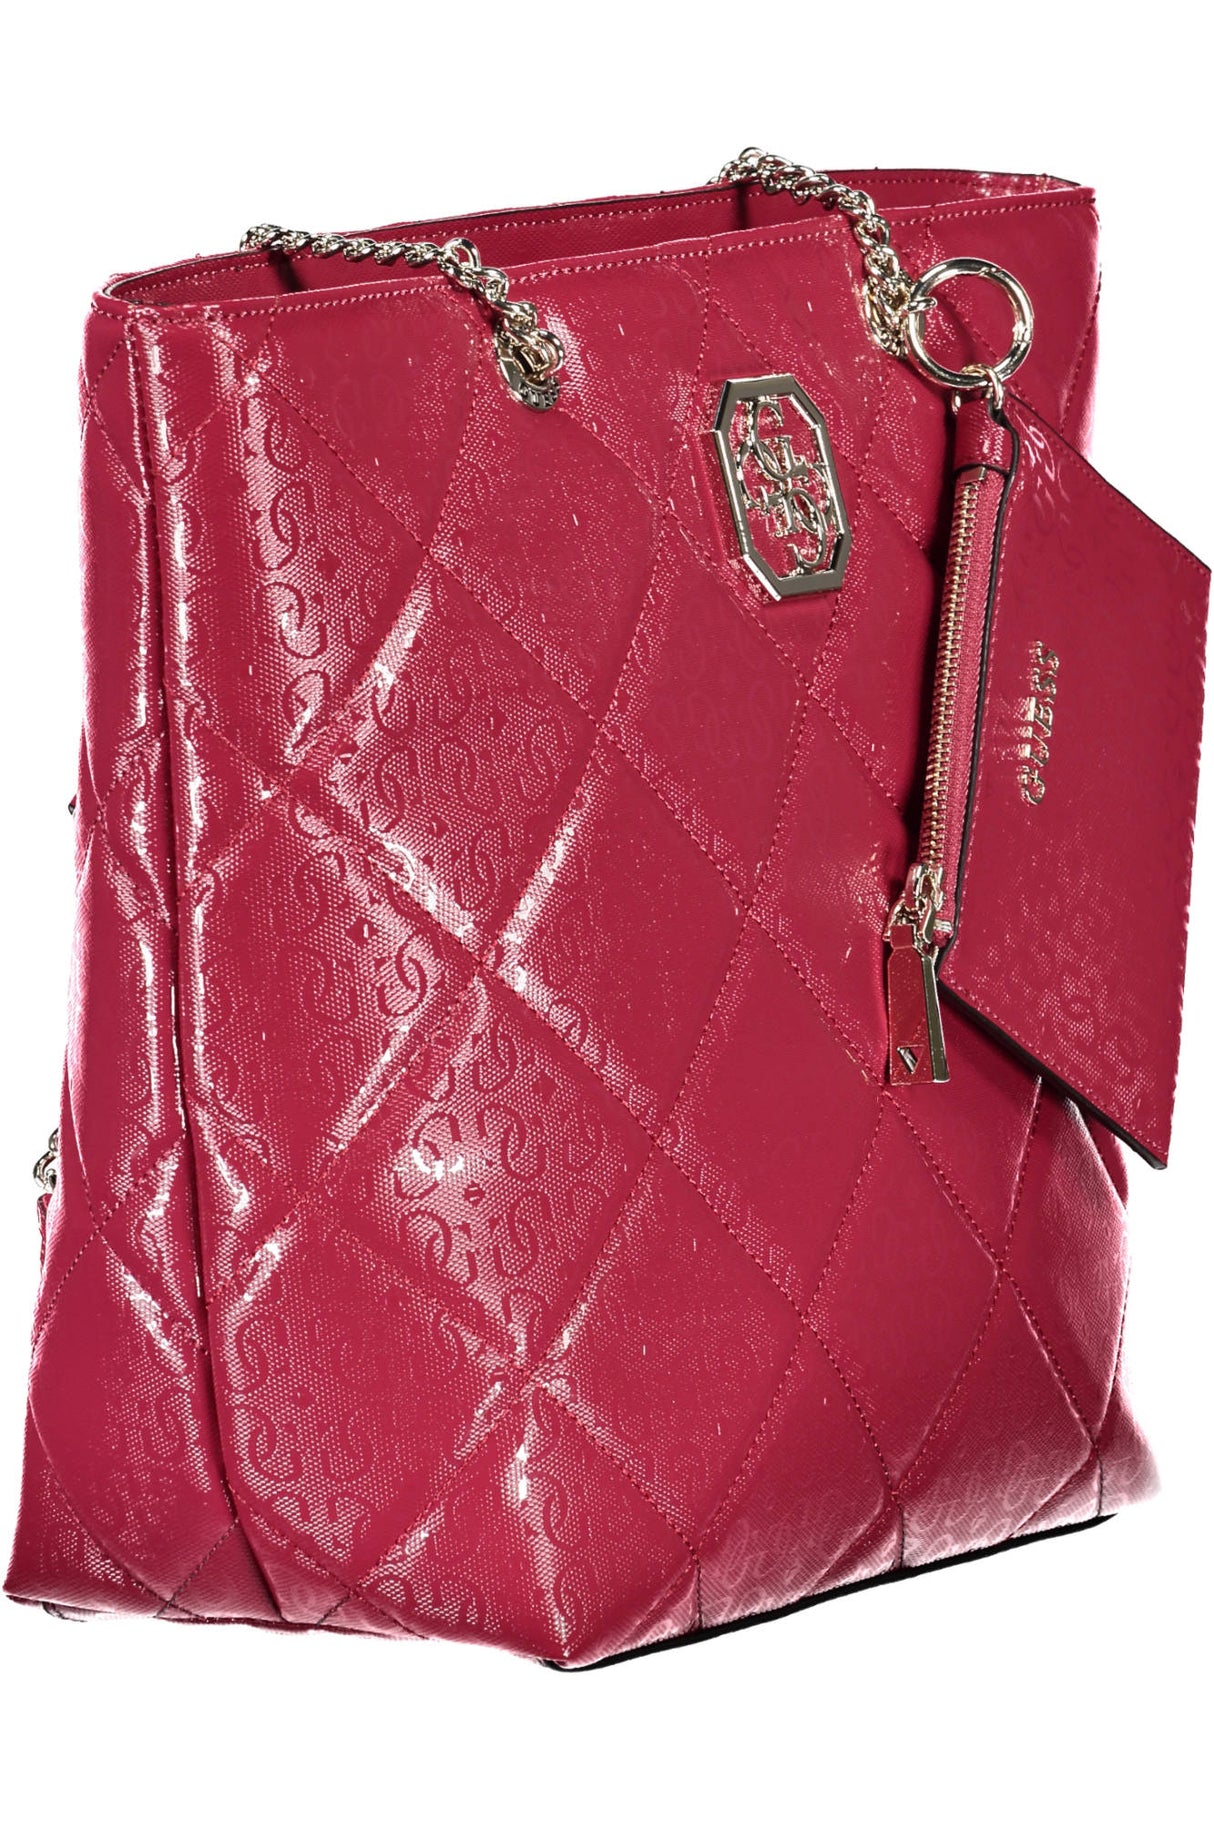 Guess Delaney Purse - Women's Accessories in Red Multi